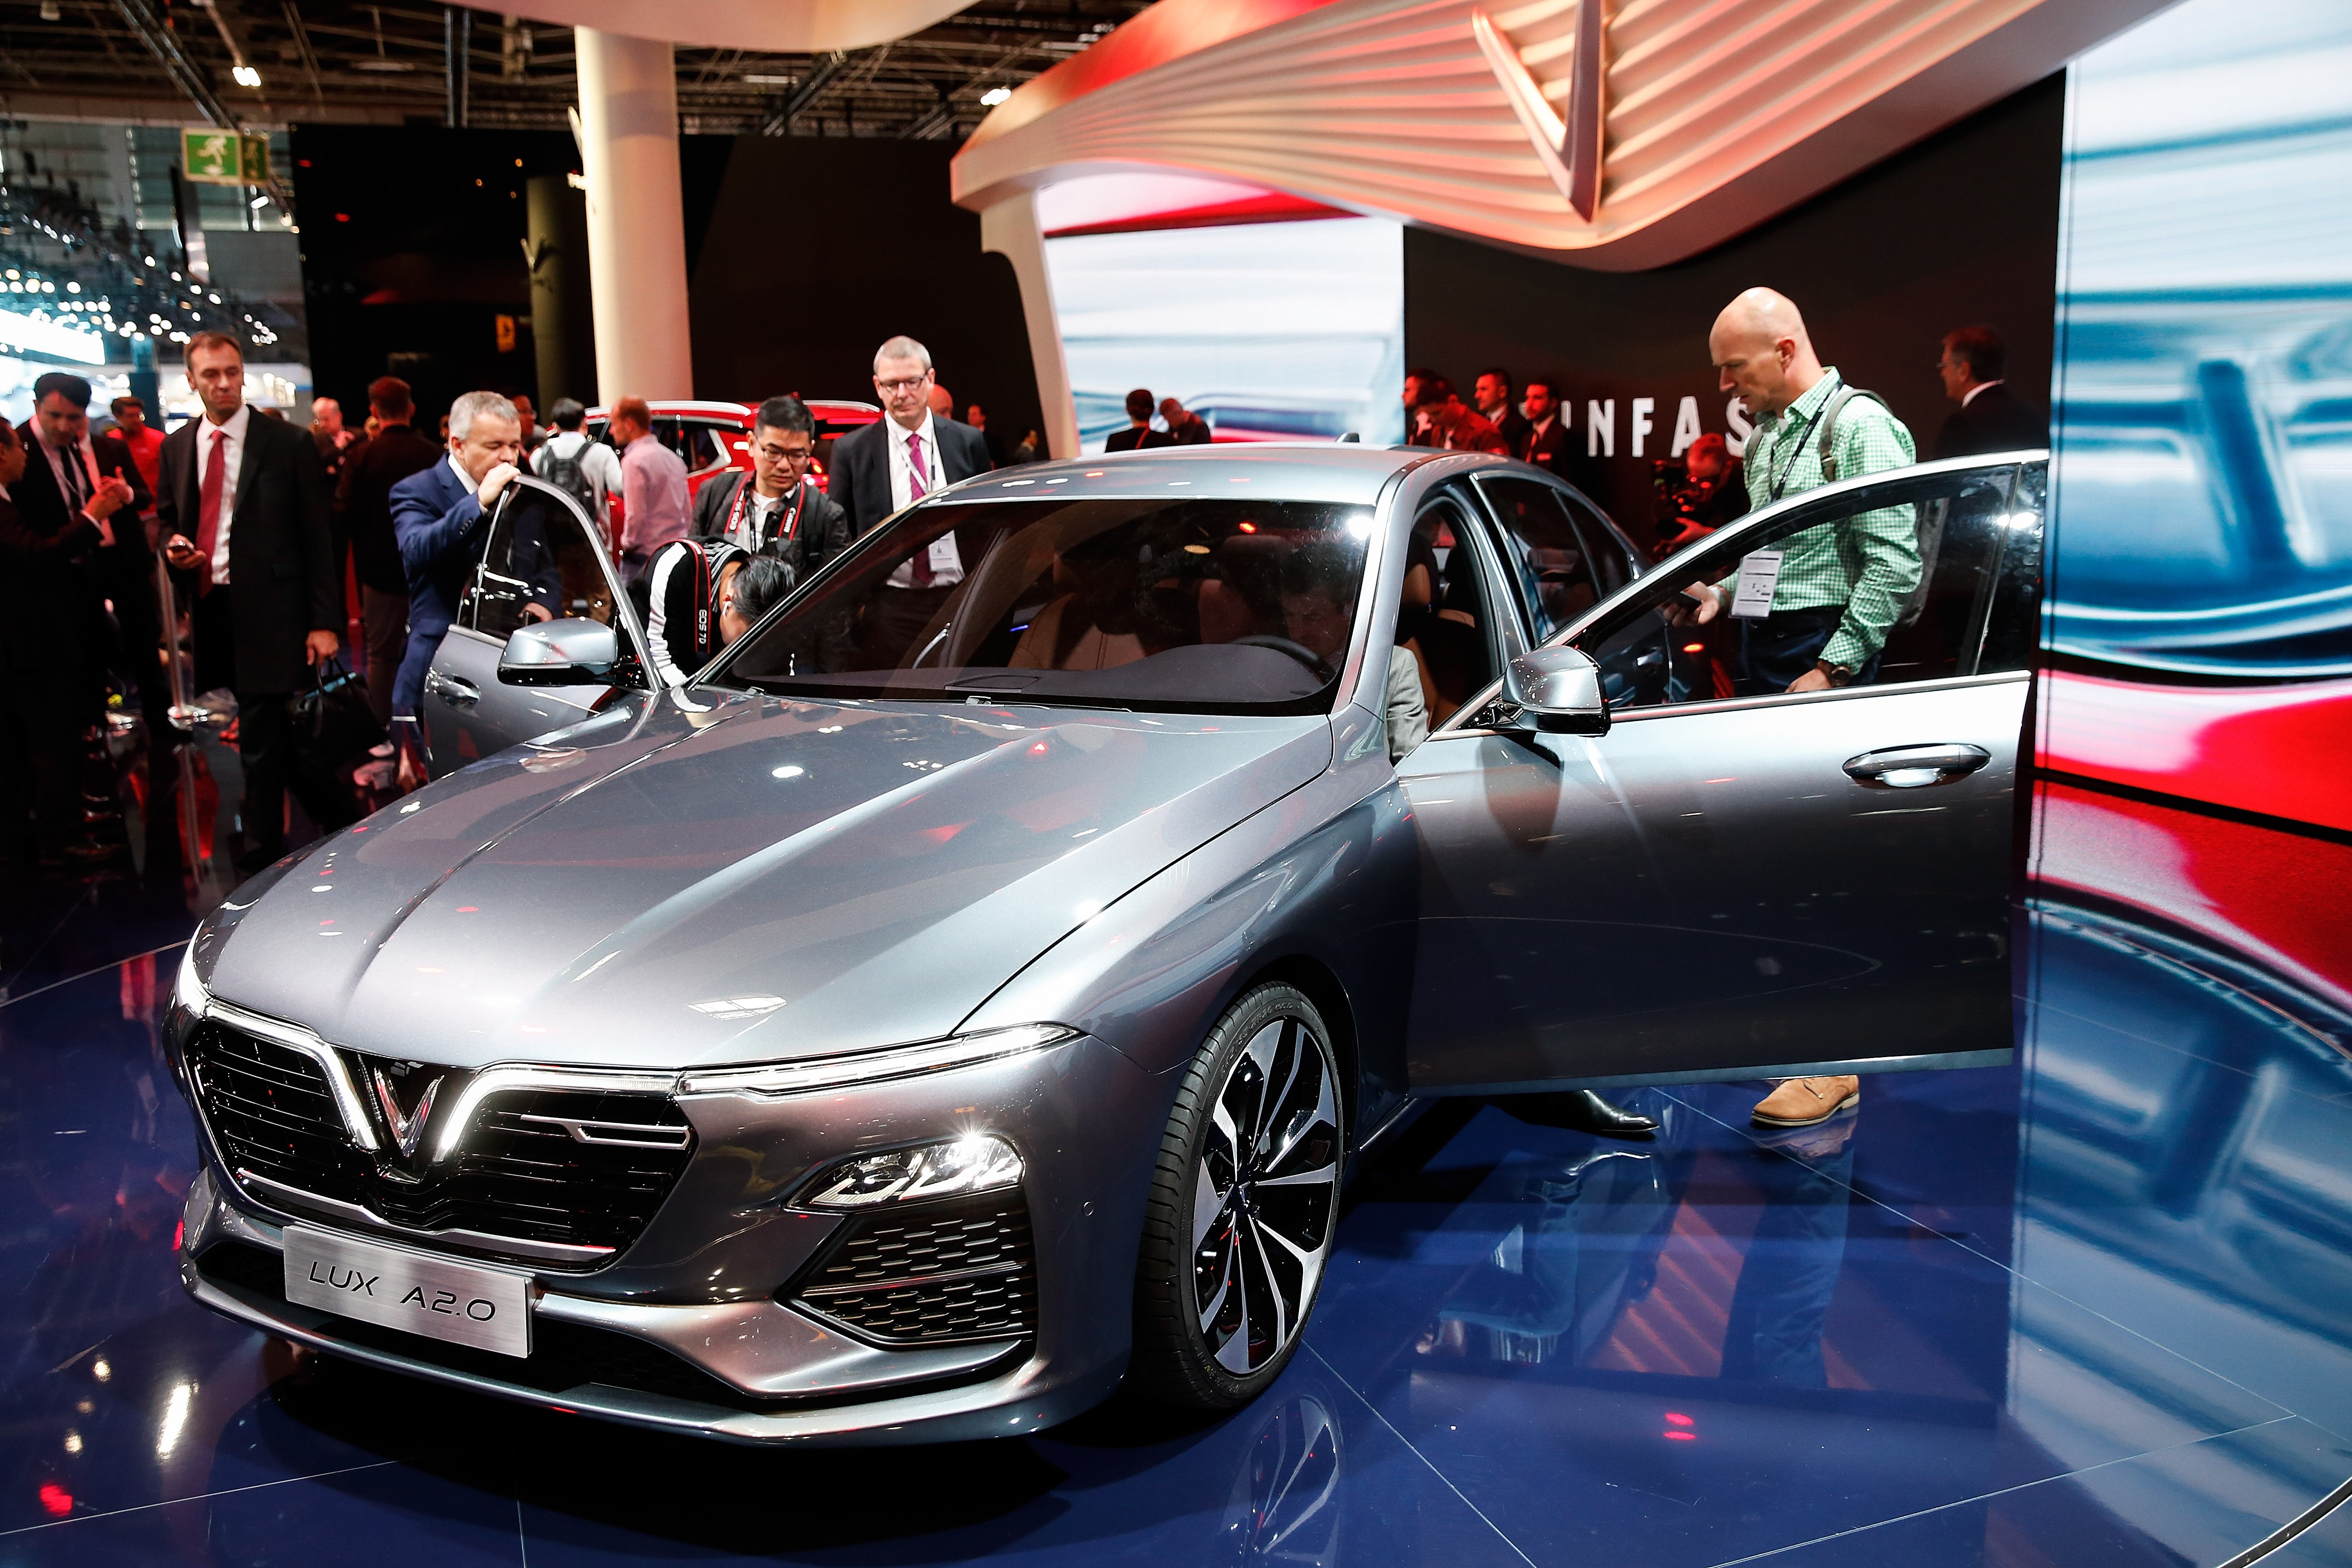 VinFast’s prototype saloon at the Paris Motor Show. Photo: Getty Images